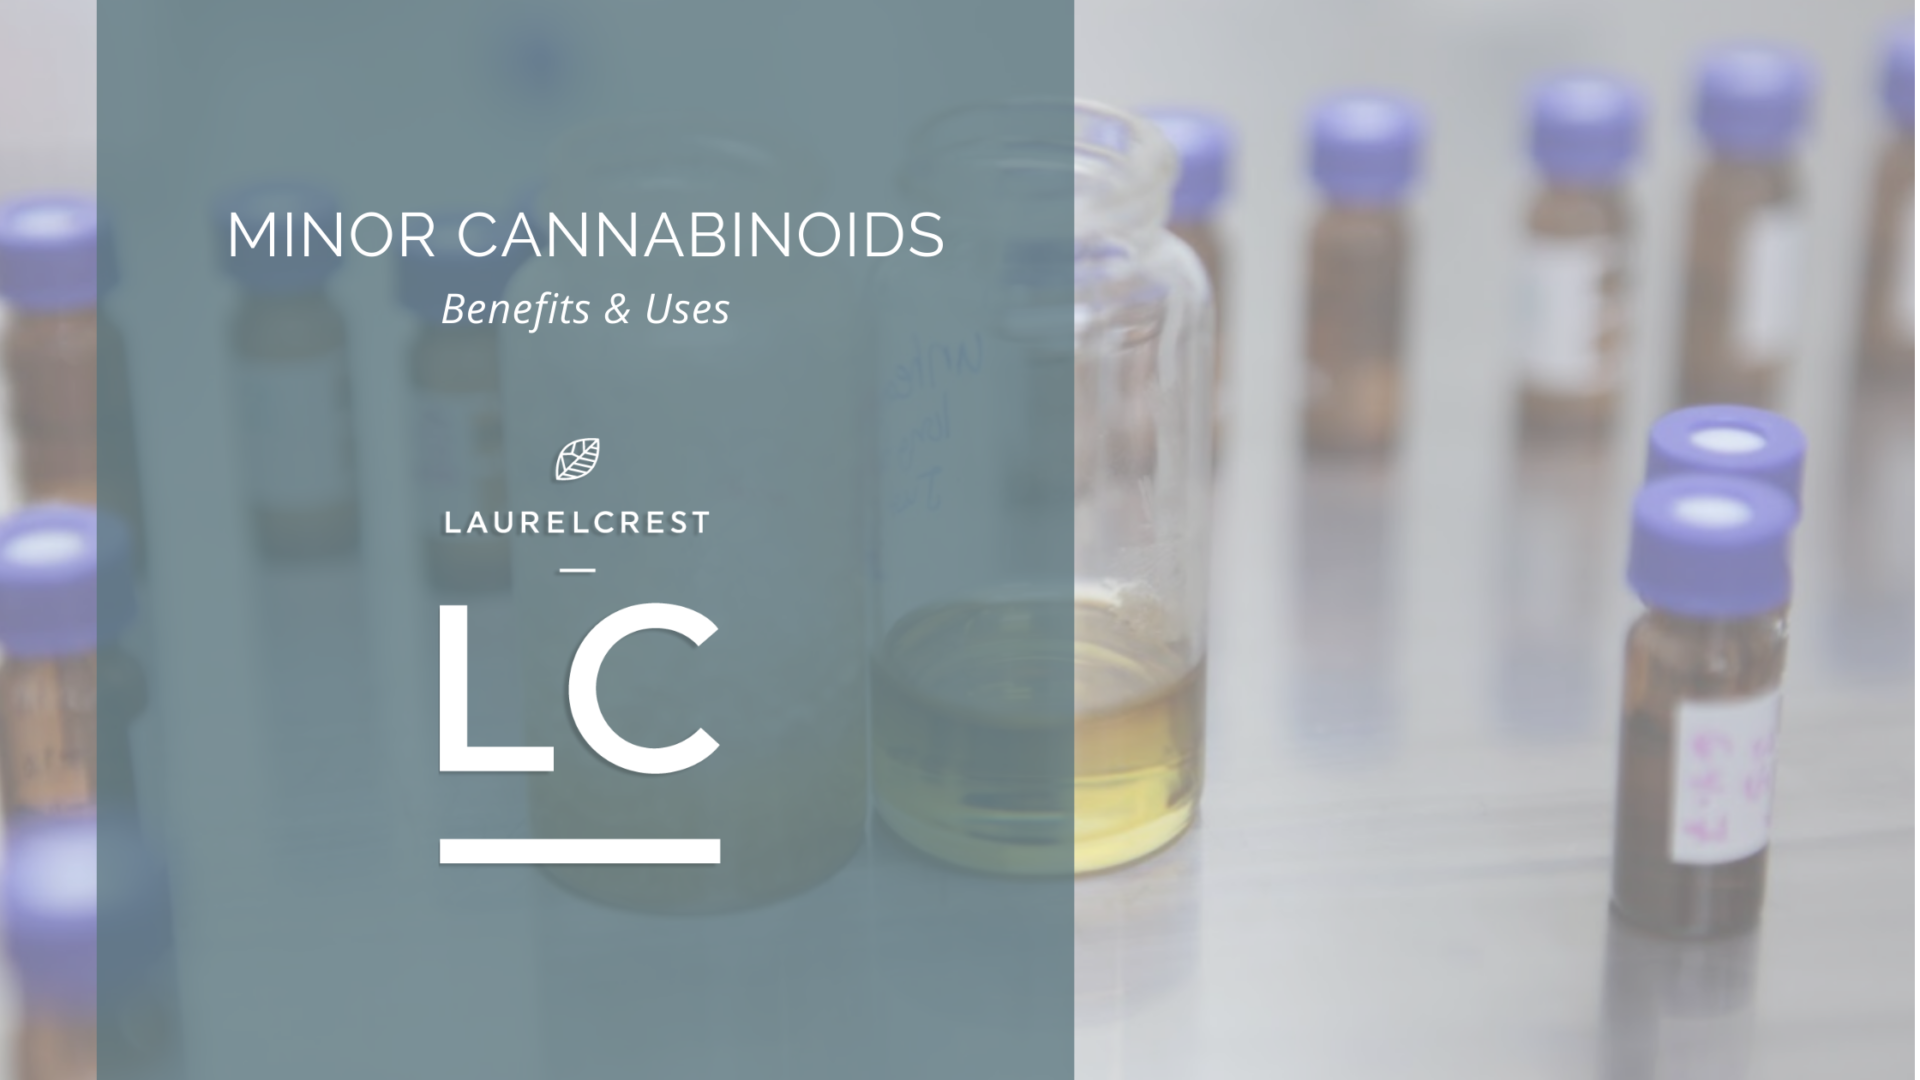 Cbc Oil And Benicar - Cbd|Oil|Cbc|Benefits|Effects|Pain|Thc|Products|Health|Study|Cannabinoids|Cannabis|Anxiety|Studies|Hemp|Research|Symptoms|People|Treatment|System|Plant|Body|Inflammation|Product|Evidence|Receptors|Cancer|Side|Effect|Properties|Brain|Dose|Disease|Marijuana|Cannabidiol|Disorders|Cannabinoid|Way|Relief|Cells|Cbd Oil|Cbc Oil|Cbd Products|Side Effects|Endocannabinoid System|Chronic Pain|Cannabis Plant|Pain Relief|Cbd Oil Benefits|Cannabis Oil|Health Benefits|Multiple Sclerosis|Hemp Plant|Anti-Inflammatory Properties|Blood Pressure|Entourage Effect|Neuropathic Pain|Cbd Product|Hemp Oil|Full-Spectrum Cbd Oil|Nervous System|Hemp Seed Oil|High Blood Pressure|Immune System|Cbd Gummies|Cannabis Oil Benefits|Drug Administration|Anxiety Disorders|Dravet Syndrome|Lennox-Gastaut Syndrome